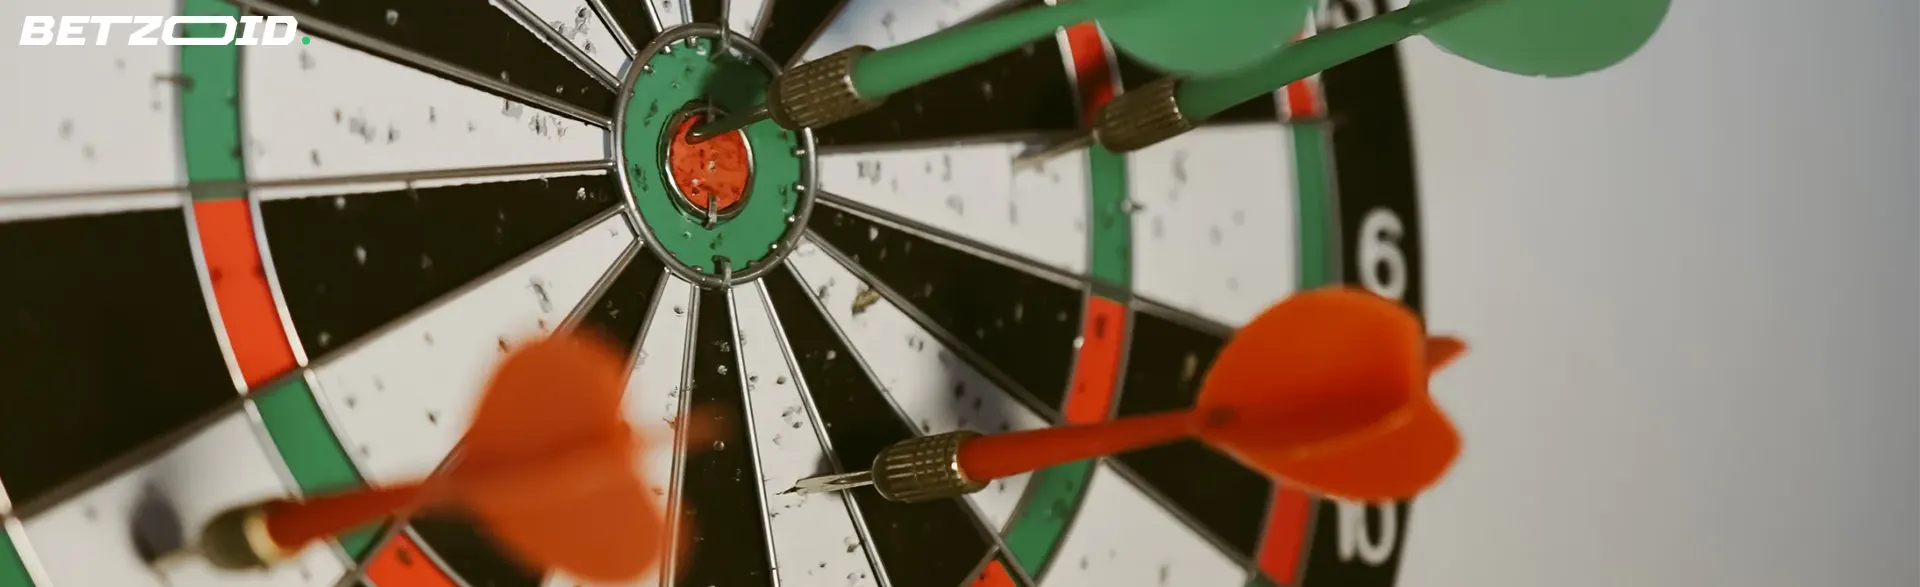 Dartboard with darts hitting the bullseye, representing the best free bet offers available in Canada.